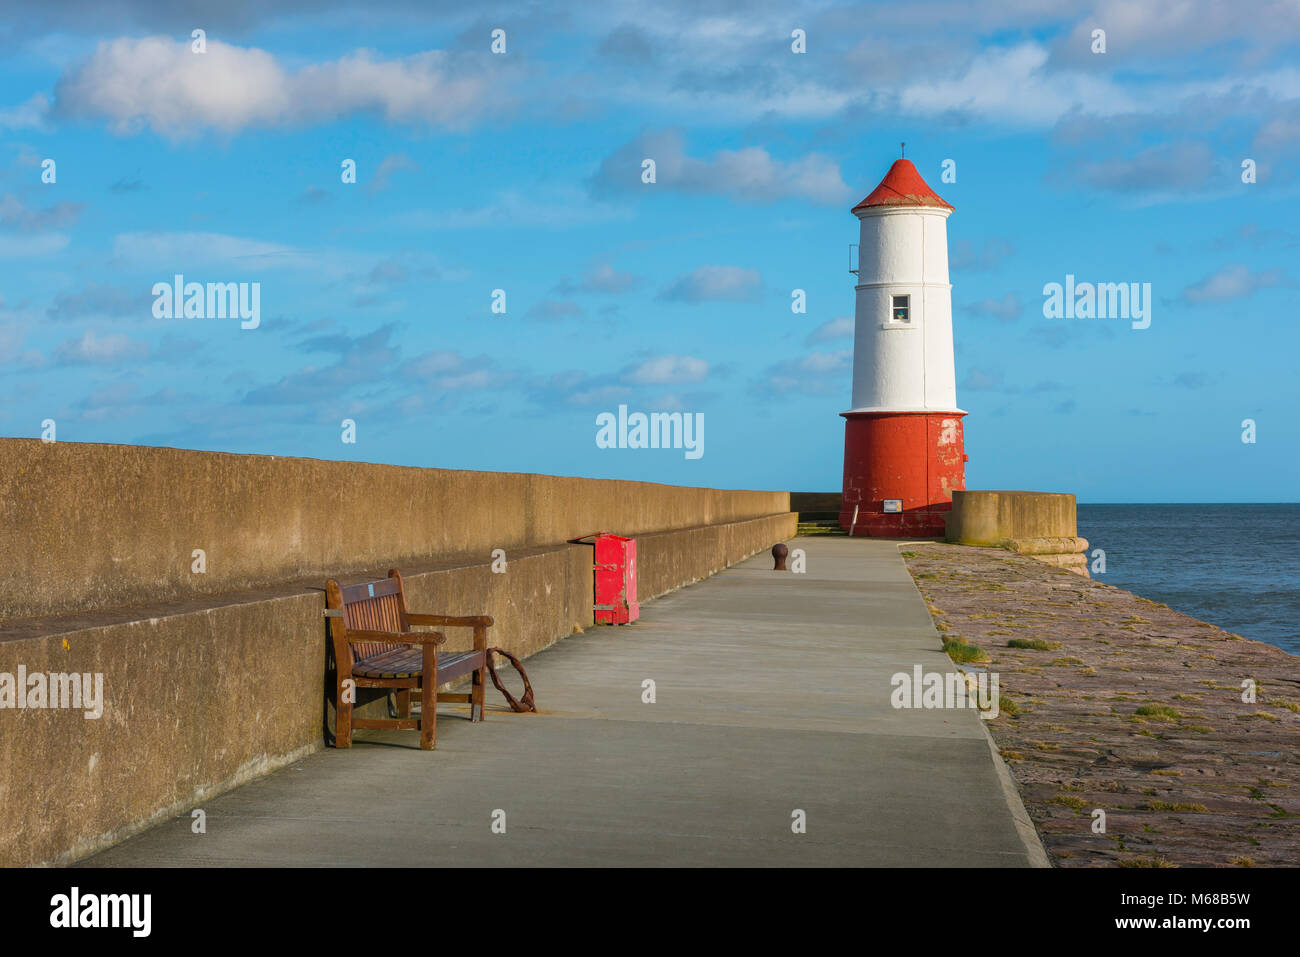 Berwick Lighthouse, view of the 19th century lighthouse at the end of the 880 metre breakwater pier in Berwick upon Tweed, Northumberland, England, UK Stock Photo